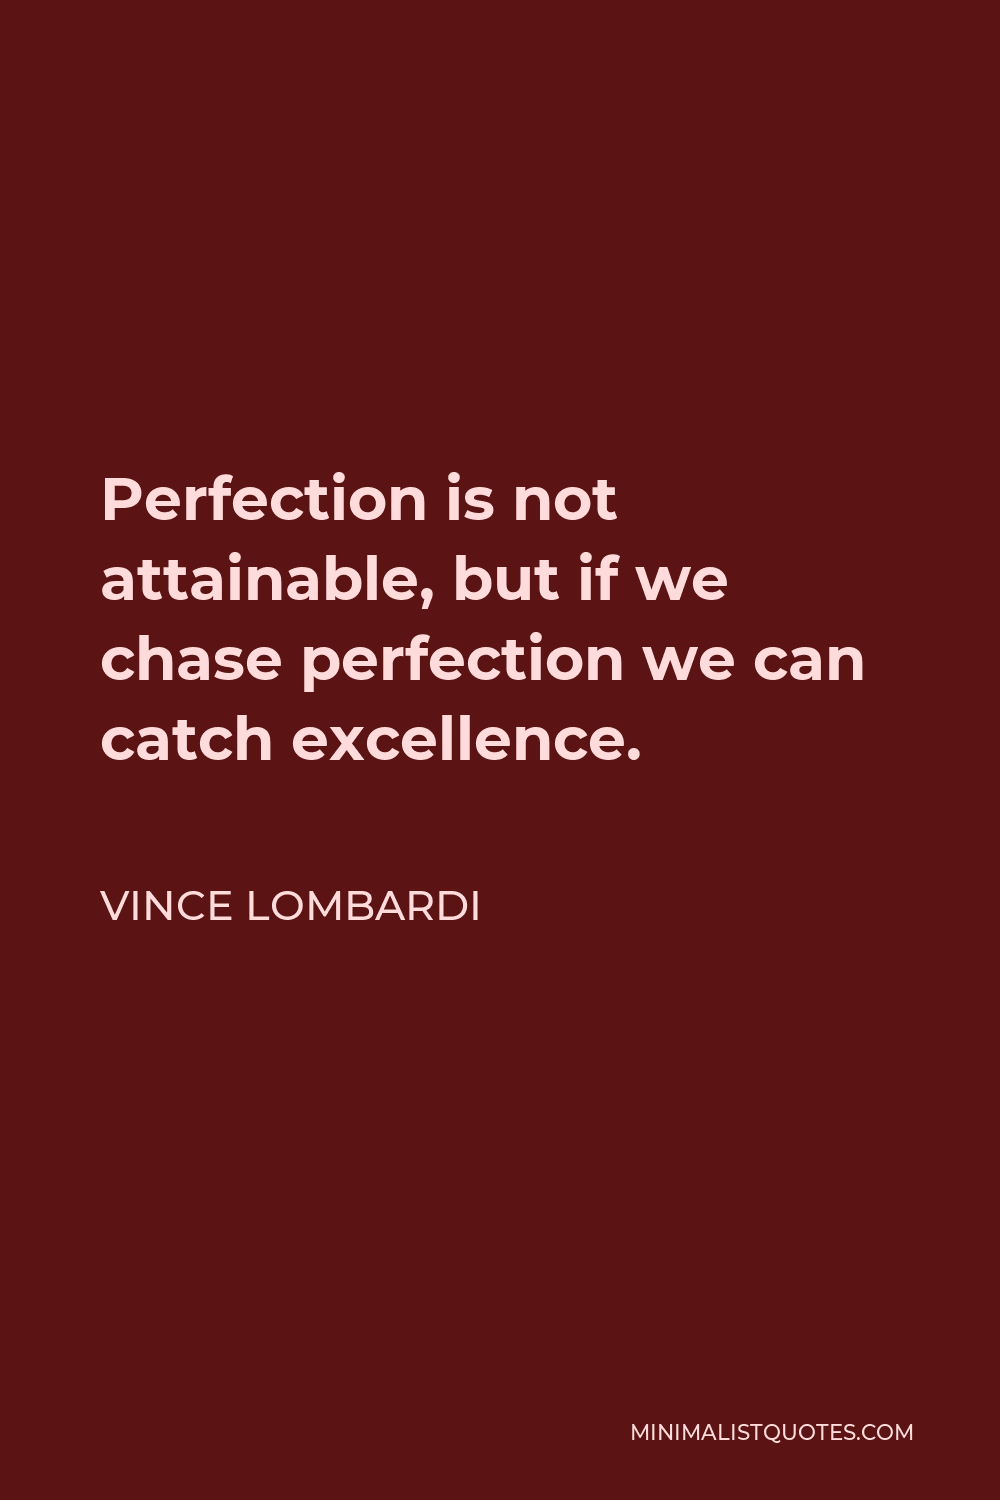 Vince Lombardi Quote - Perfection is not attainable, but if we chase perfection we can catch excellence.